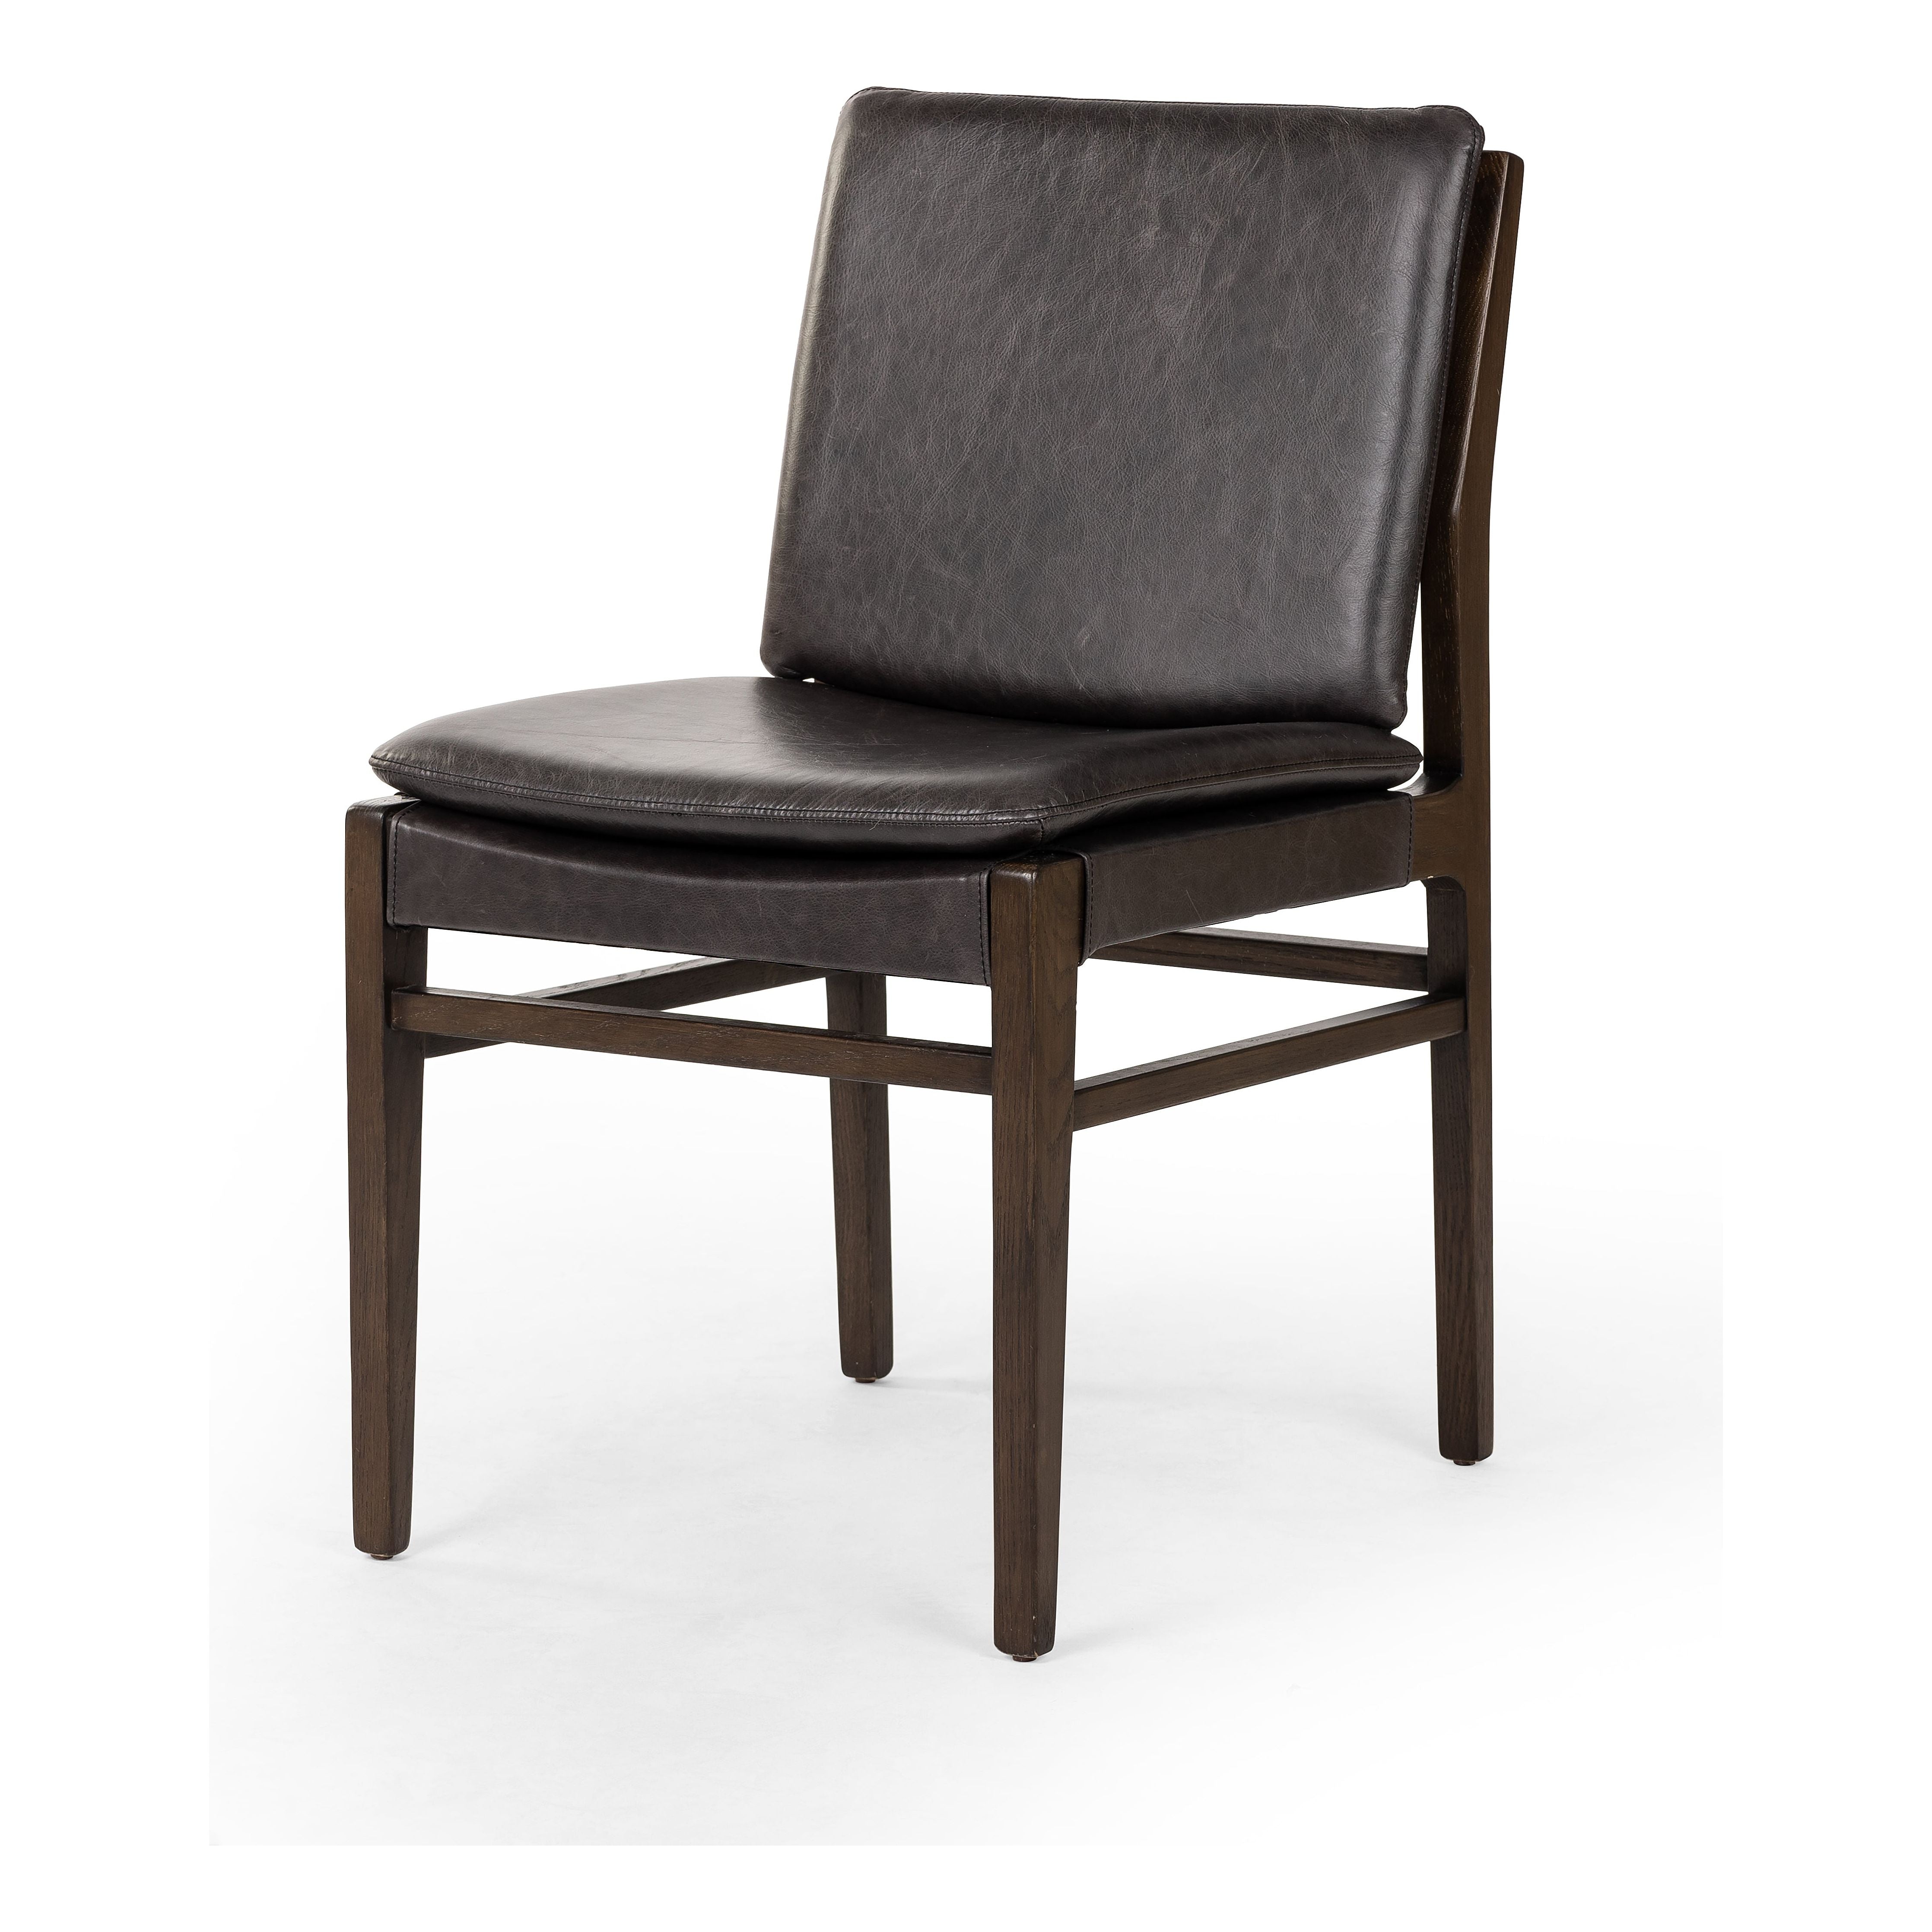 Modern and transitional, burnt oak nettlewood frames this armless dining chair. Finished with a top-grain leather exclusive to Four Hands. Amethyst Home provides interior design, new construction, custom furniture, and area rugs in the San Diego metro area.